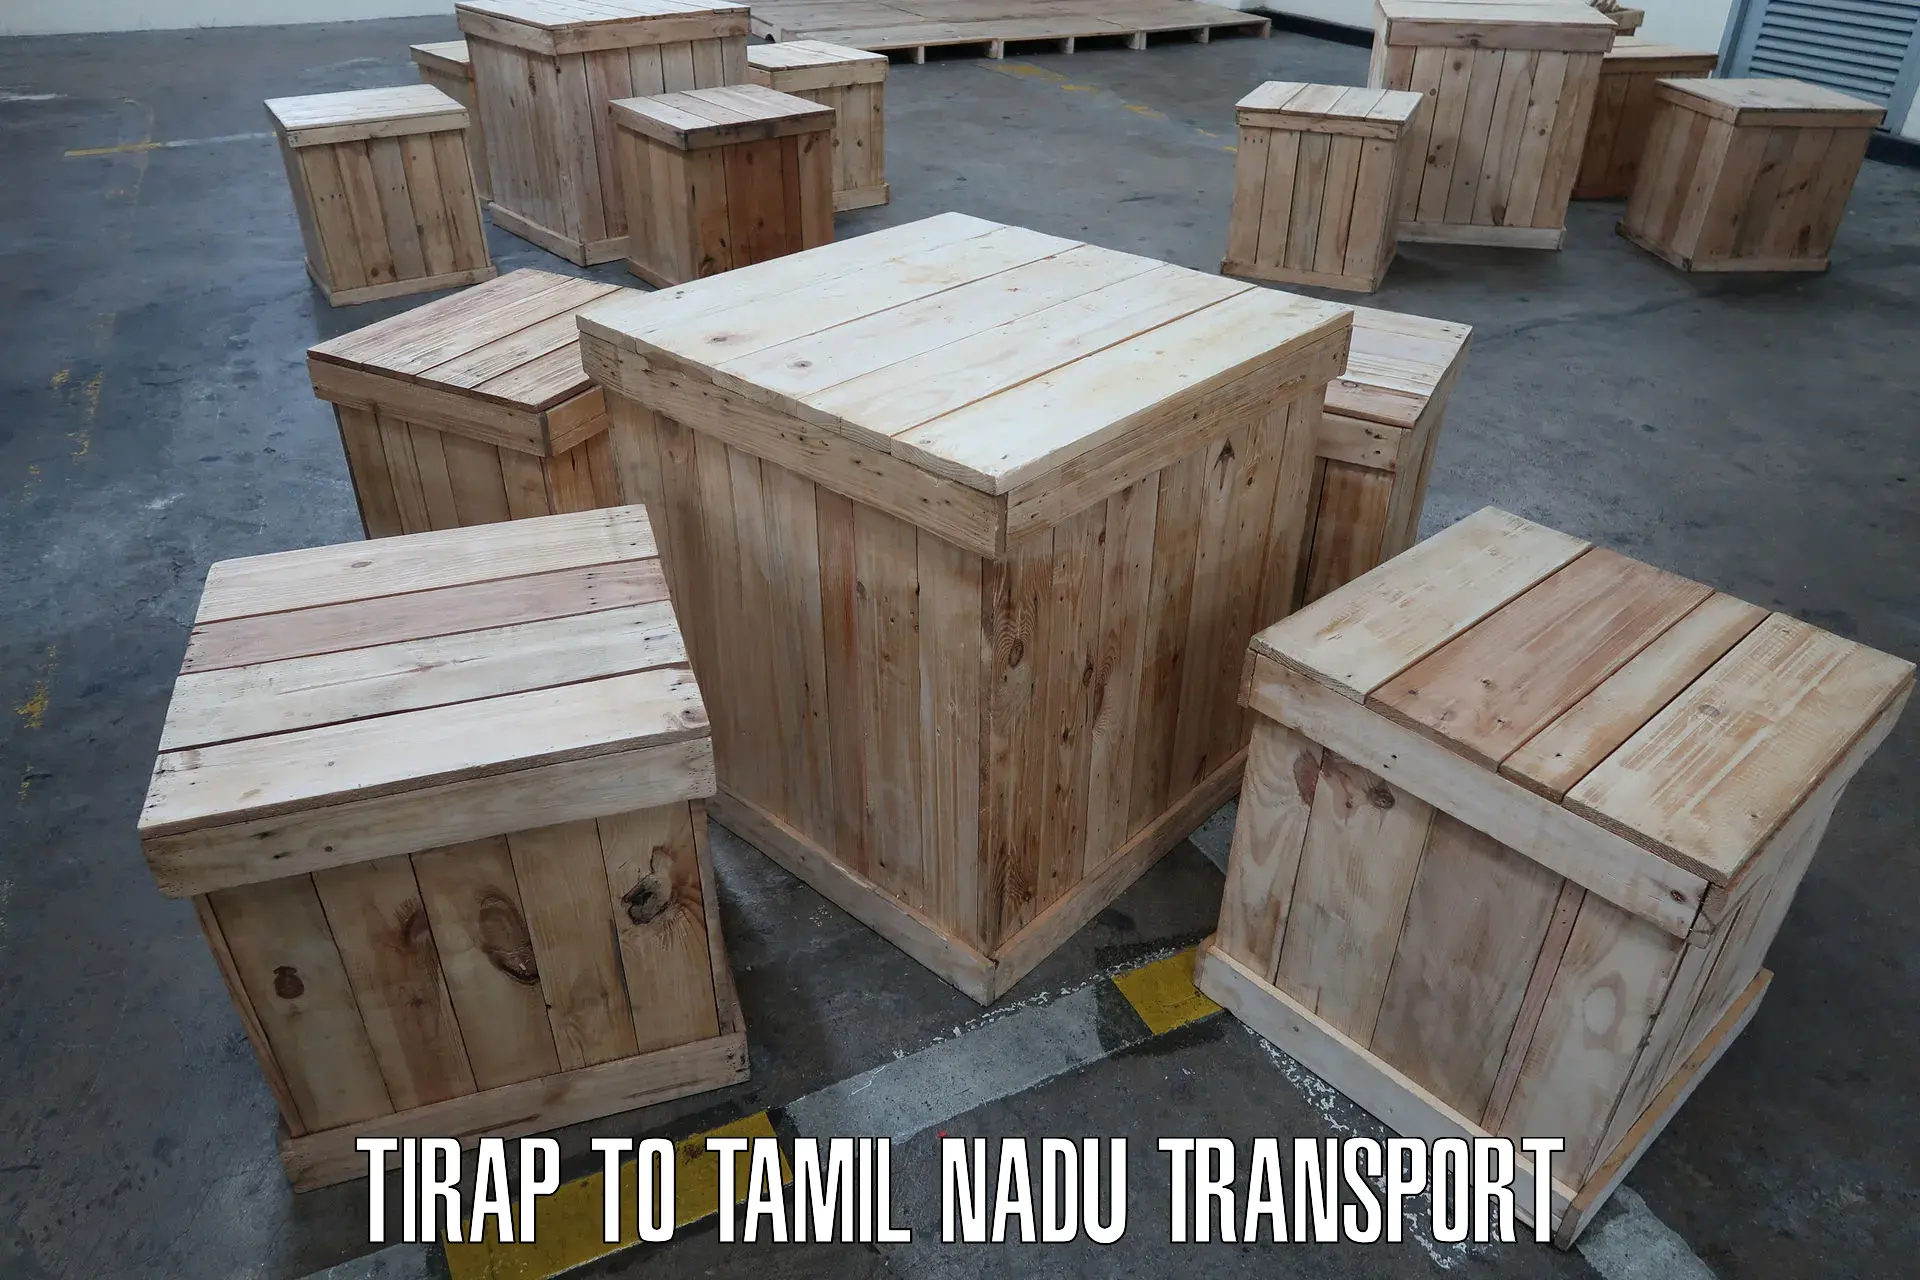 Road transport online services Tirap to Meenakshi Academy of Higher Education and Research Chennai